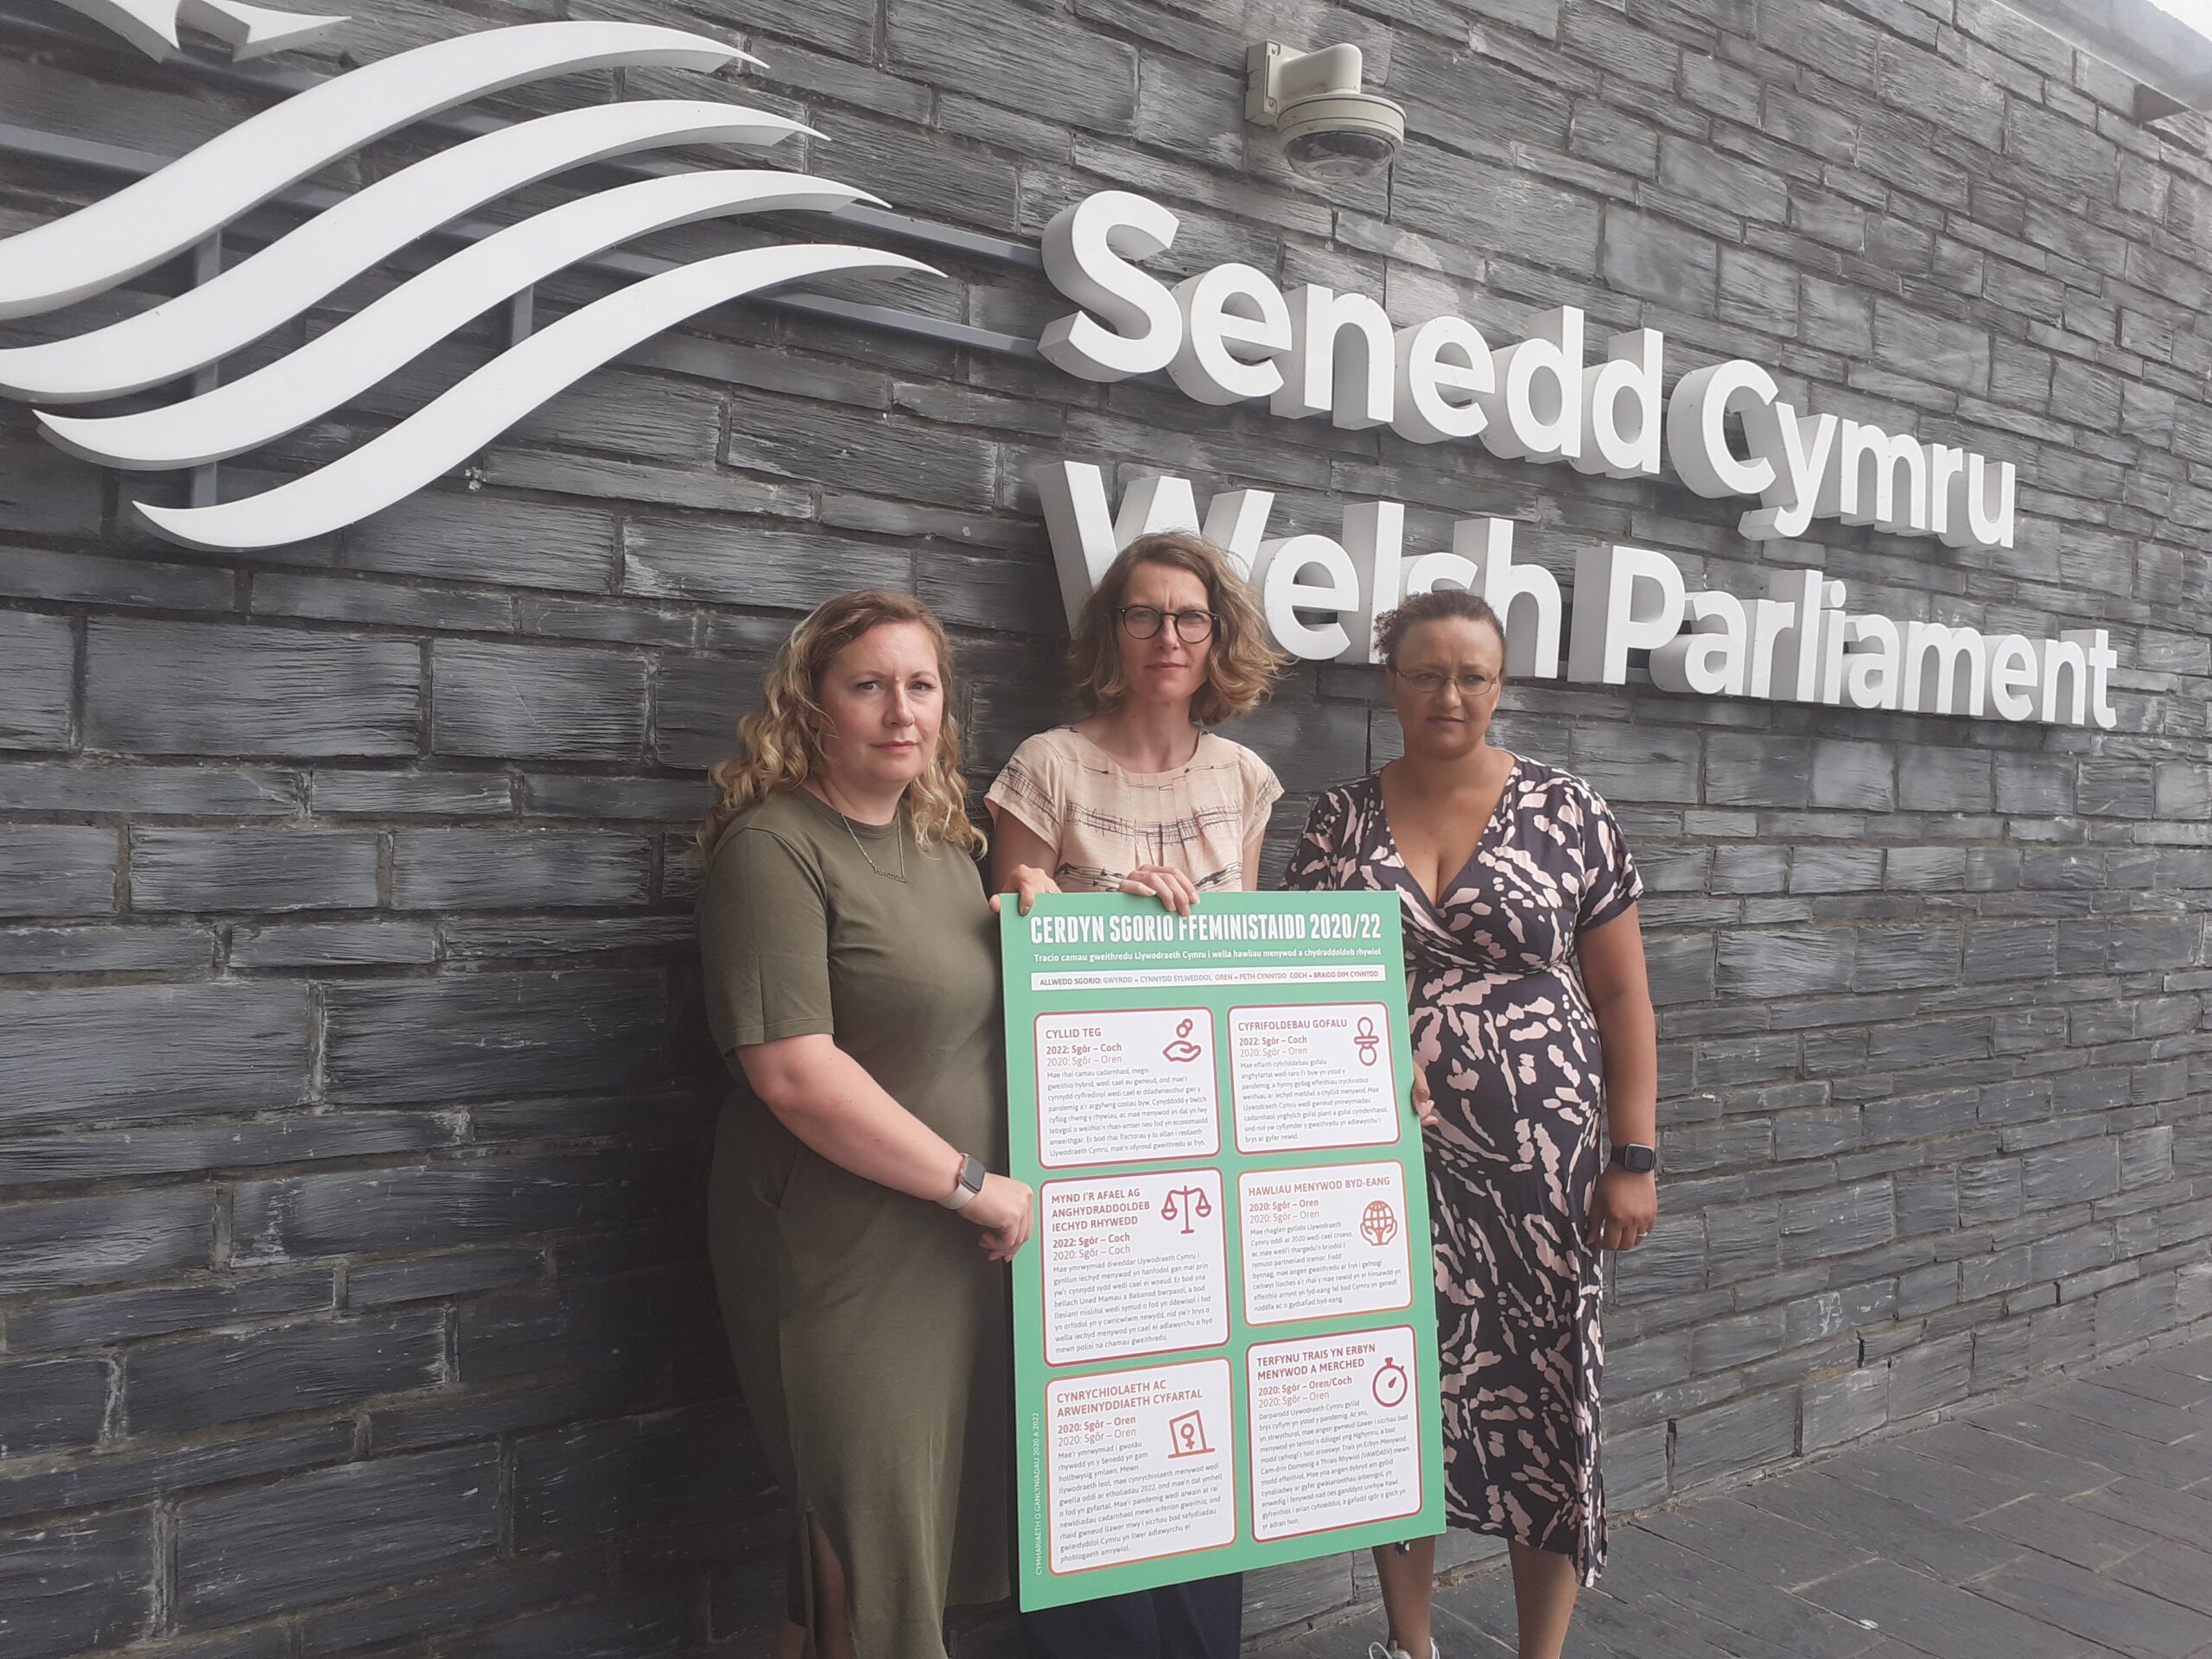 Three women pose with a large version of the feminist scorecard